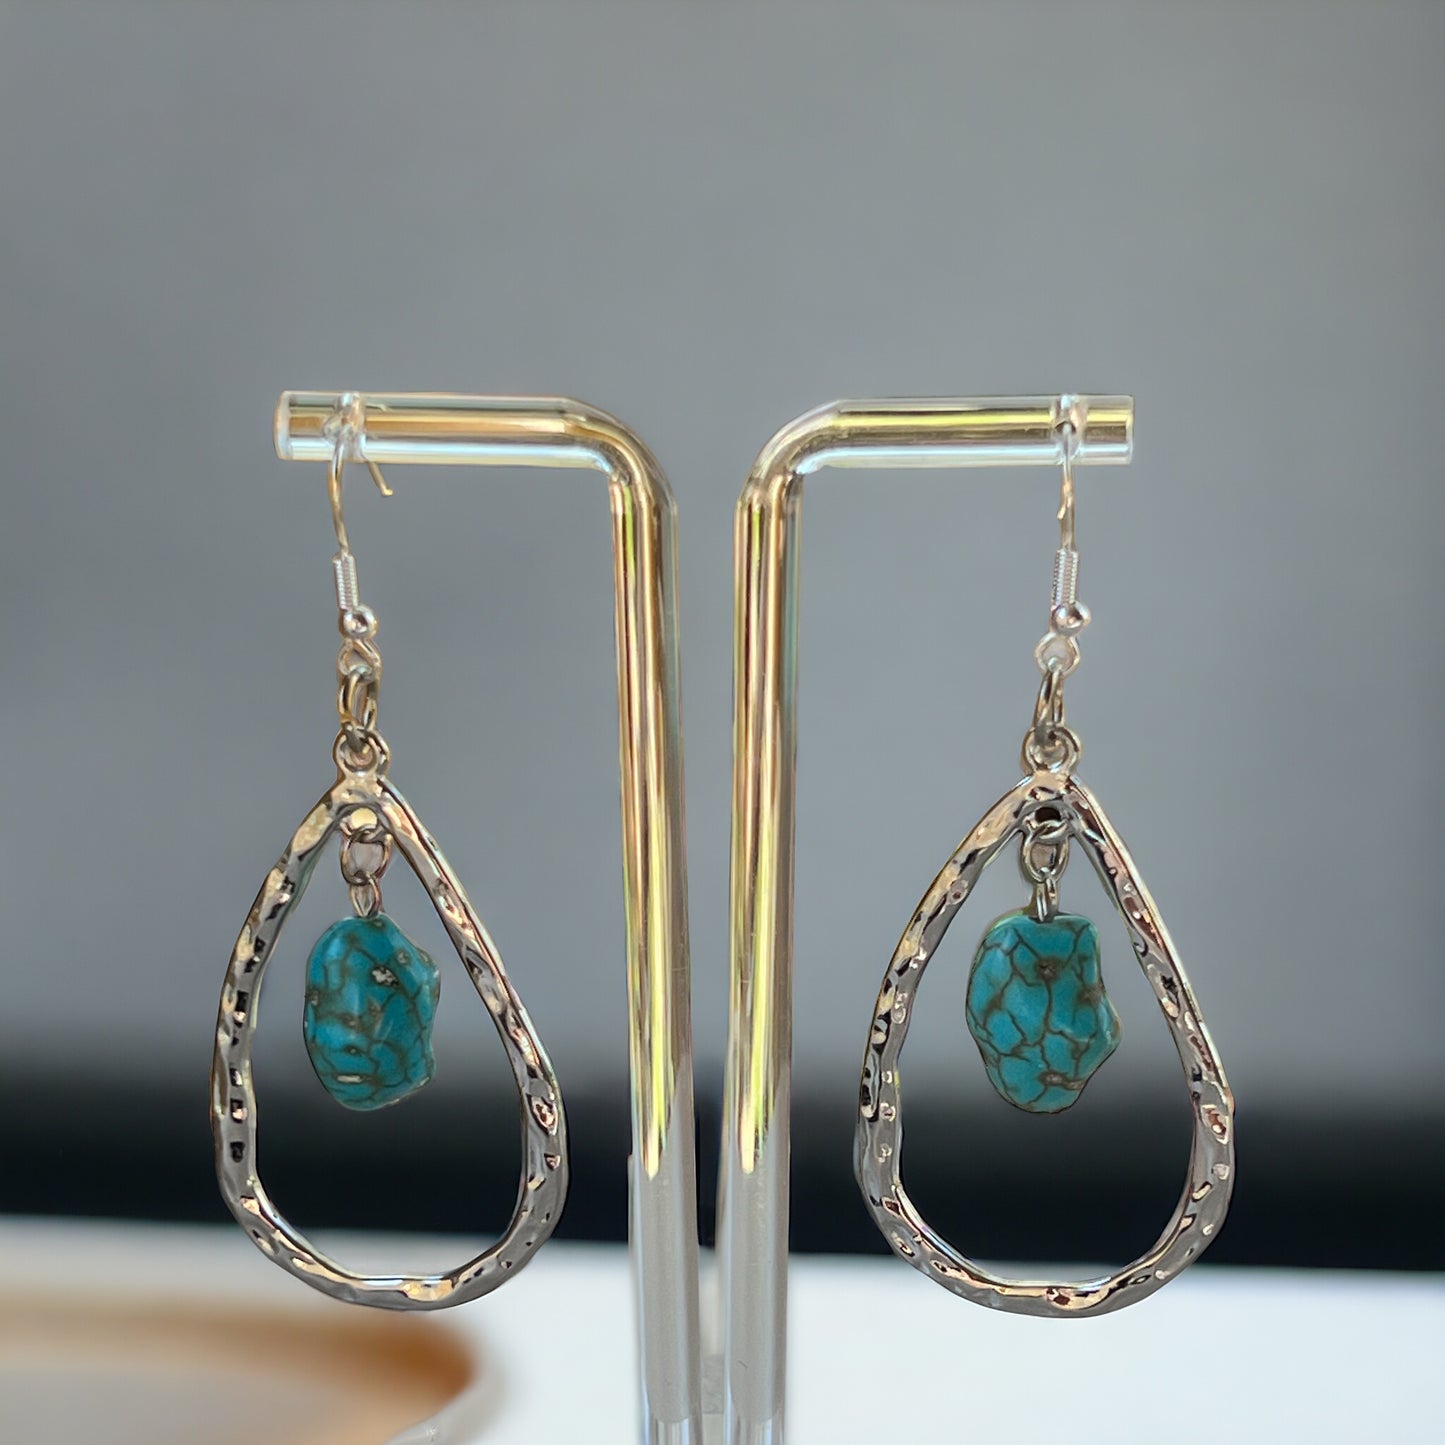 Silver Toned Hammered Metal Teardrop Earrings with Synthetic Turquoise Stone Boho Chic Statement Jewelry Country Western Earrings for Women